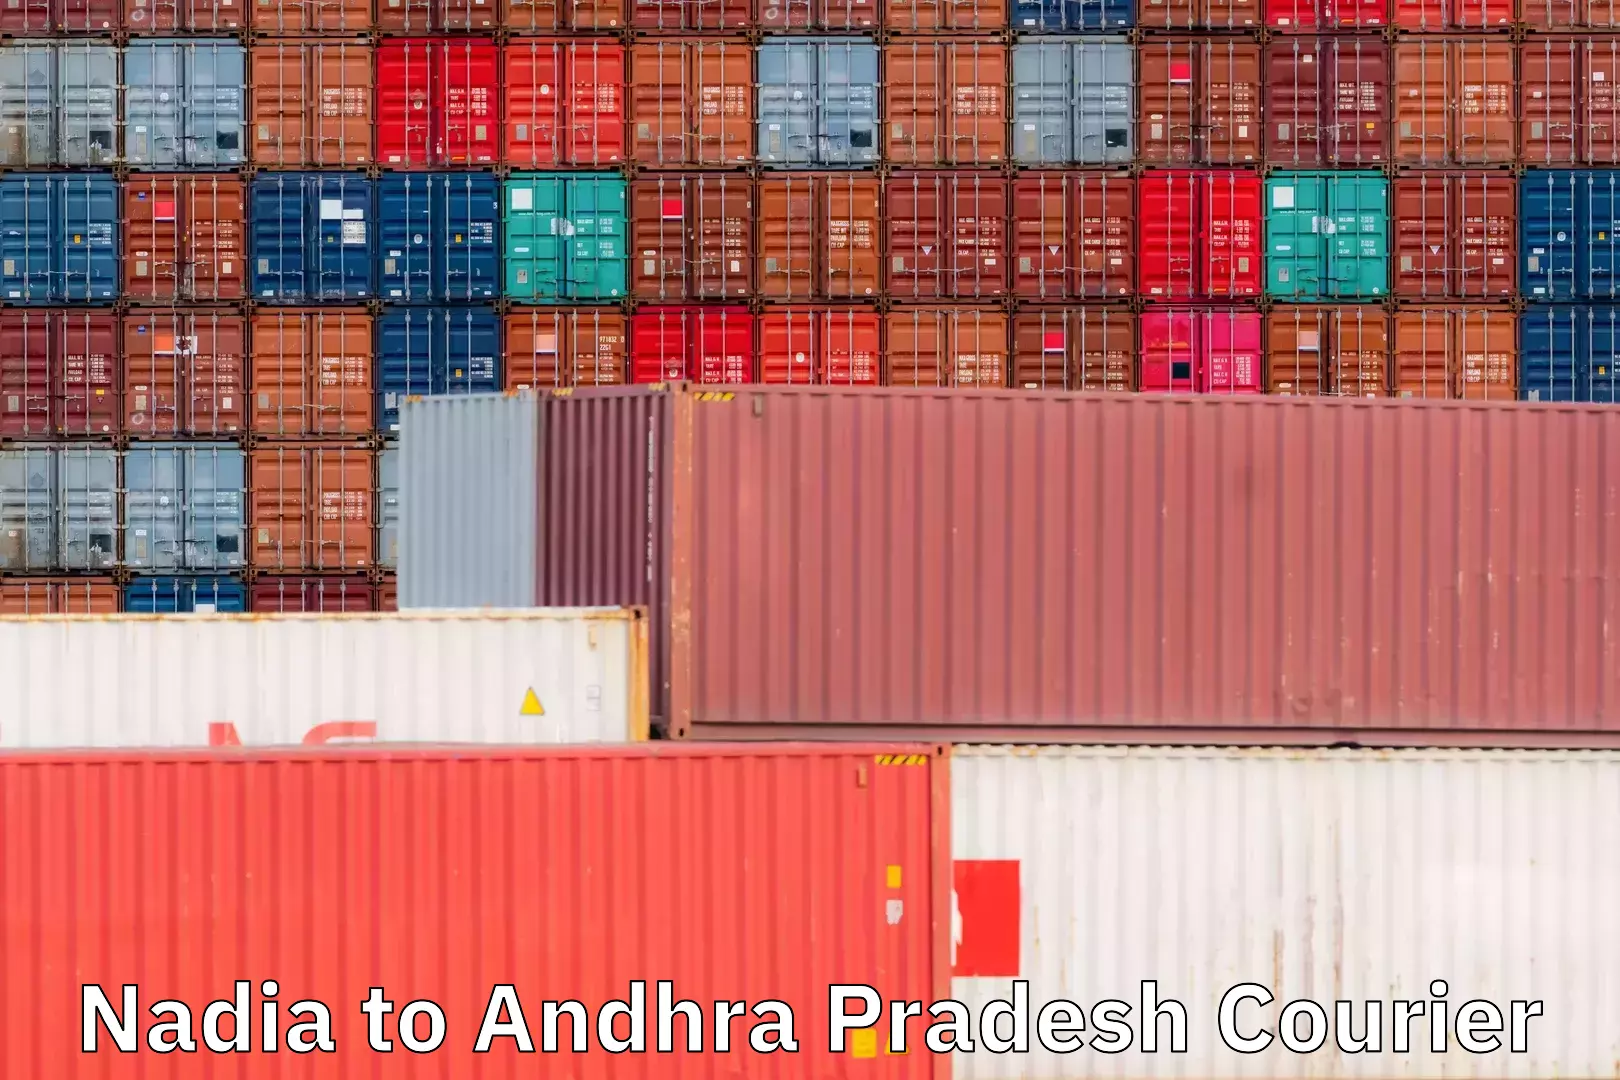 Express delivery solutions Nadia to Visakhapatnam Port